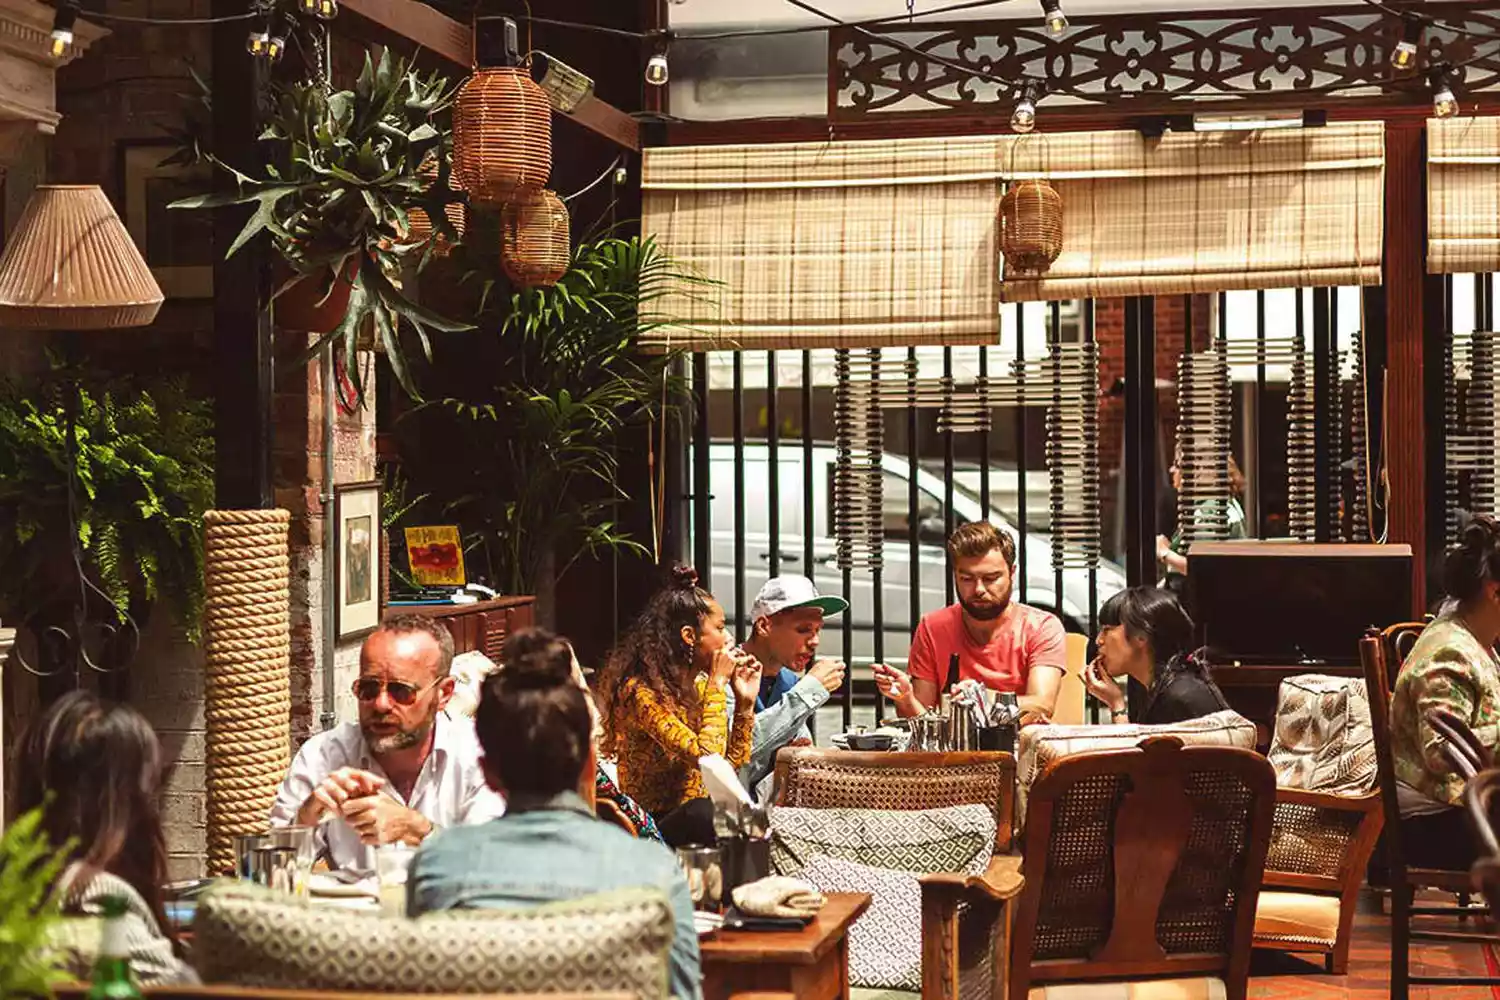 How London Became Among the Most Diverse Dining Destinations in the World